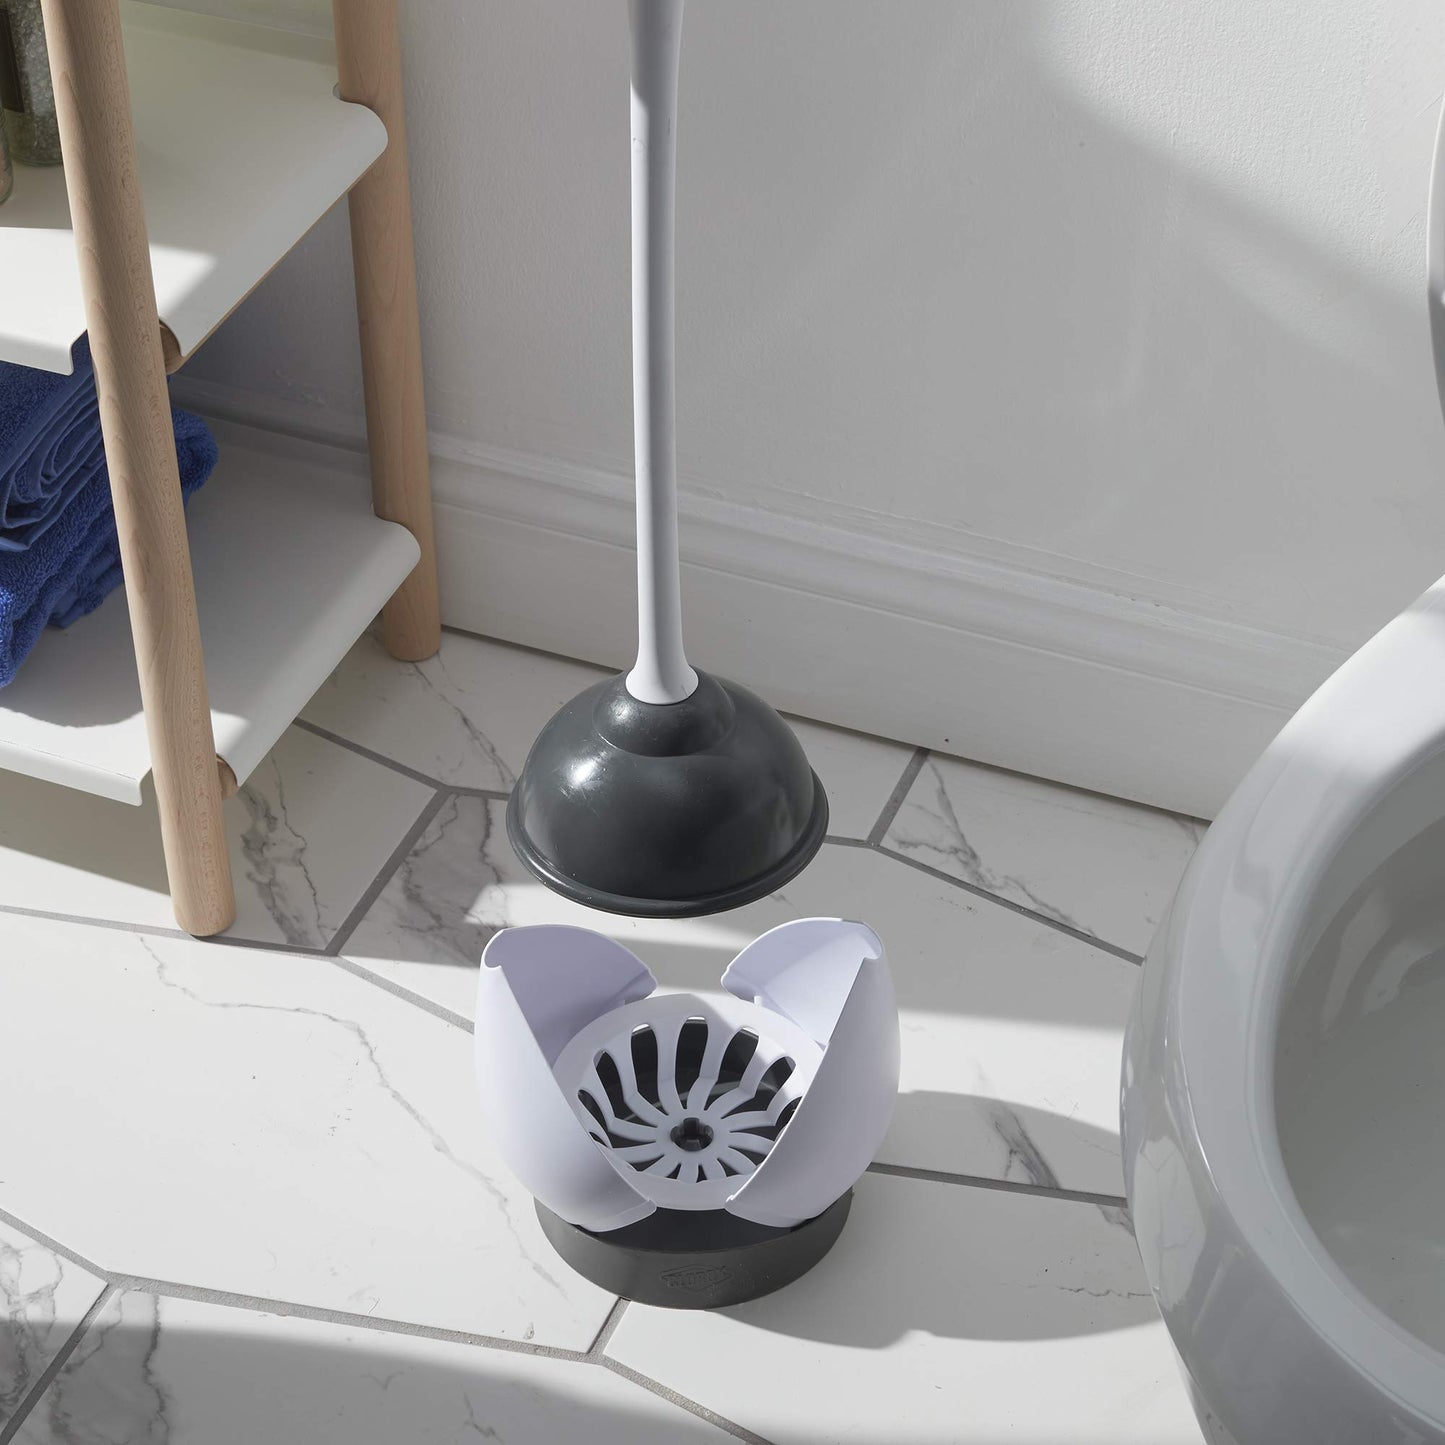 Clorox Toilet Plunger with Hideaway Storage Caddy